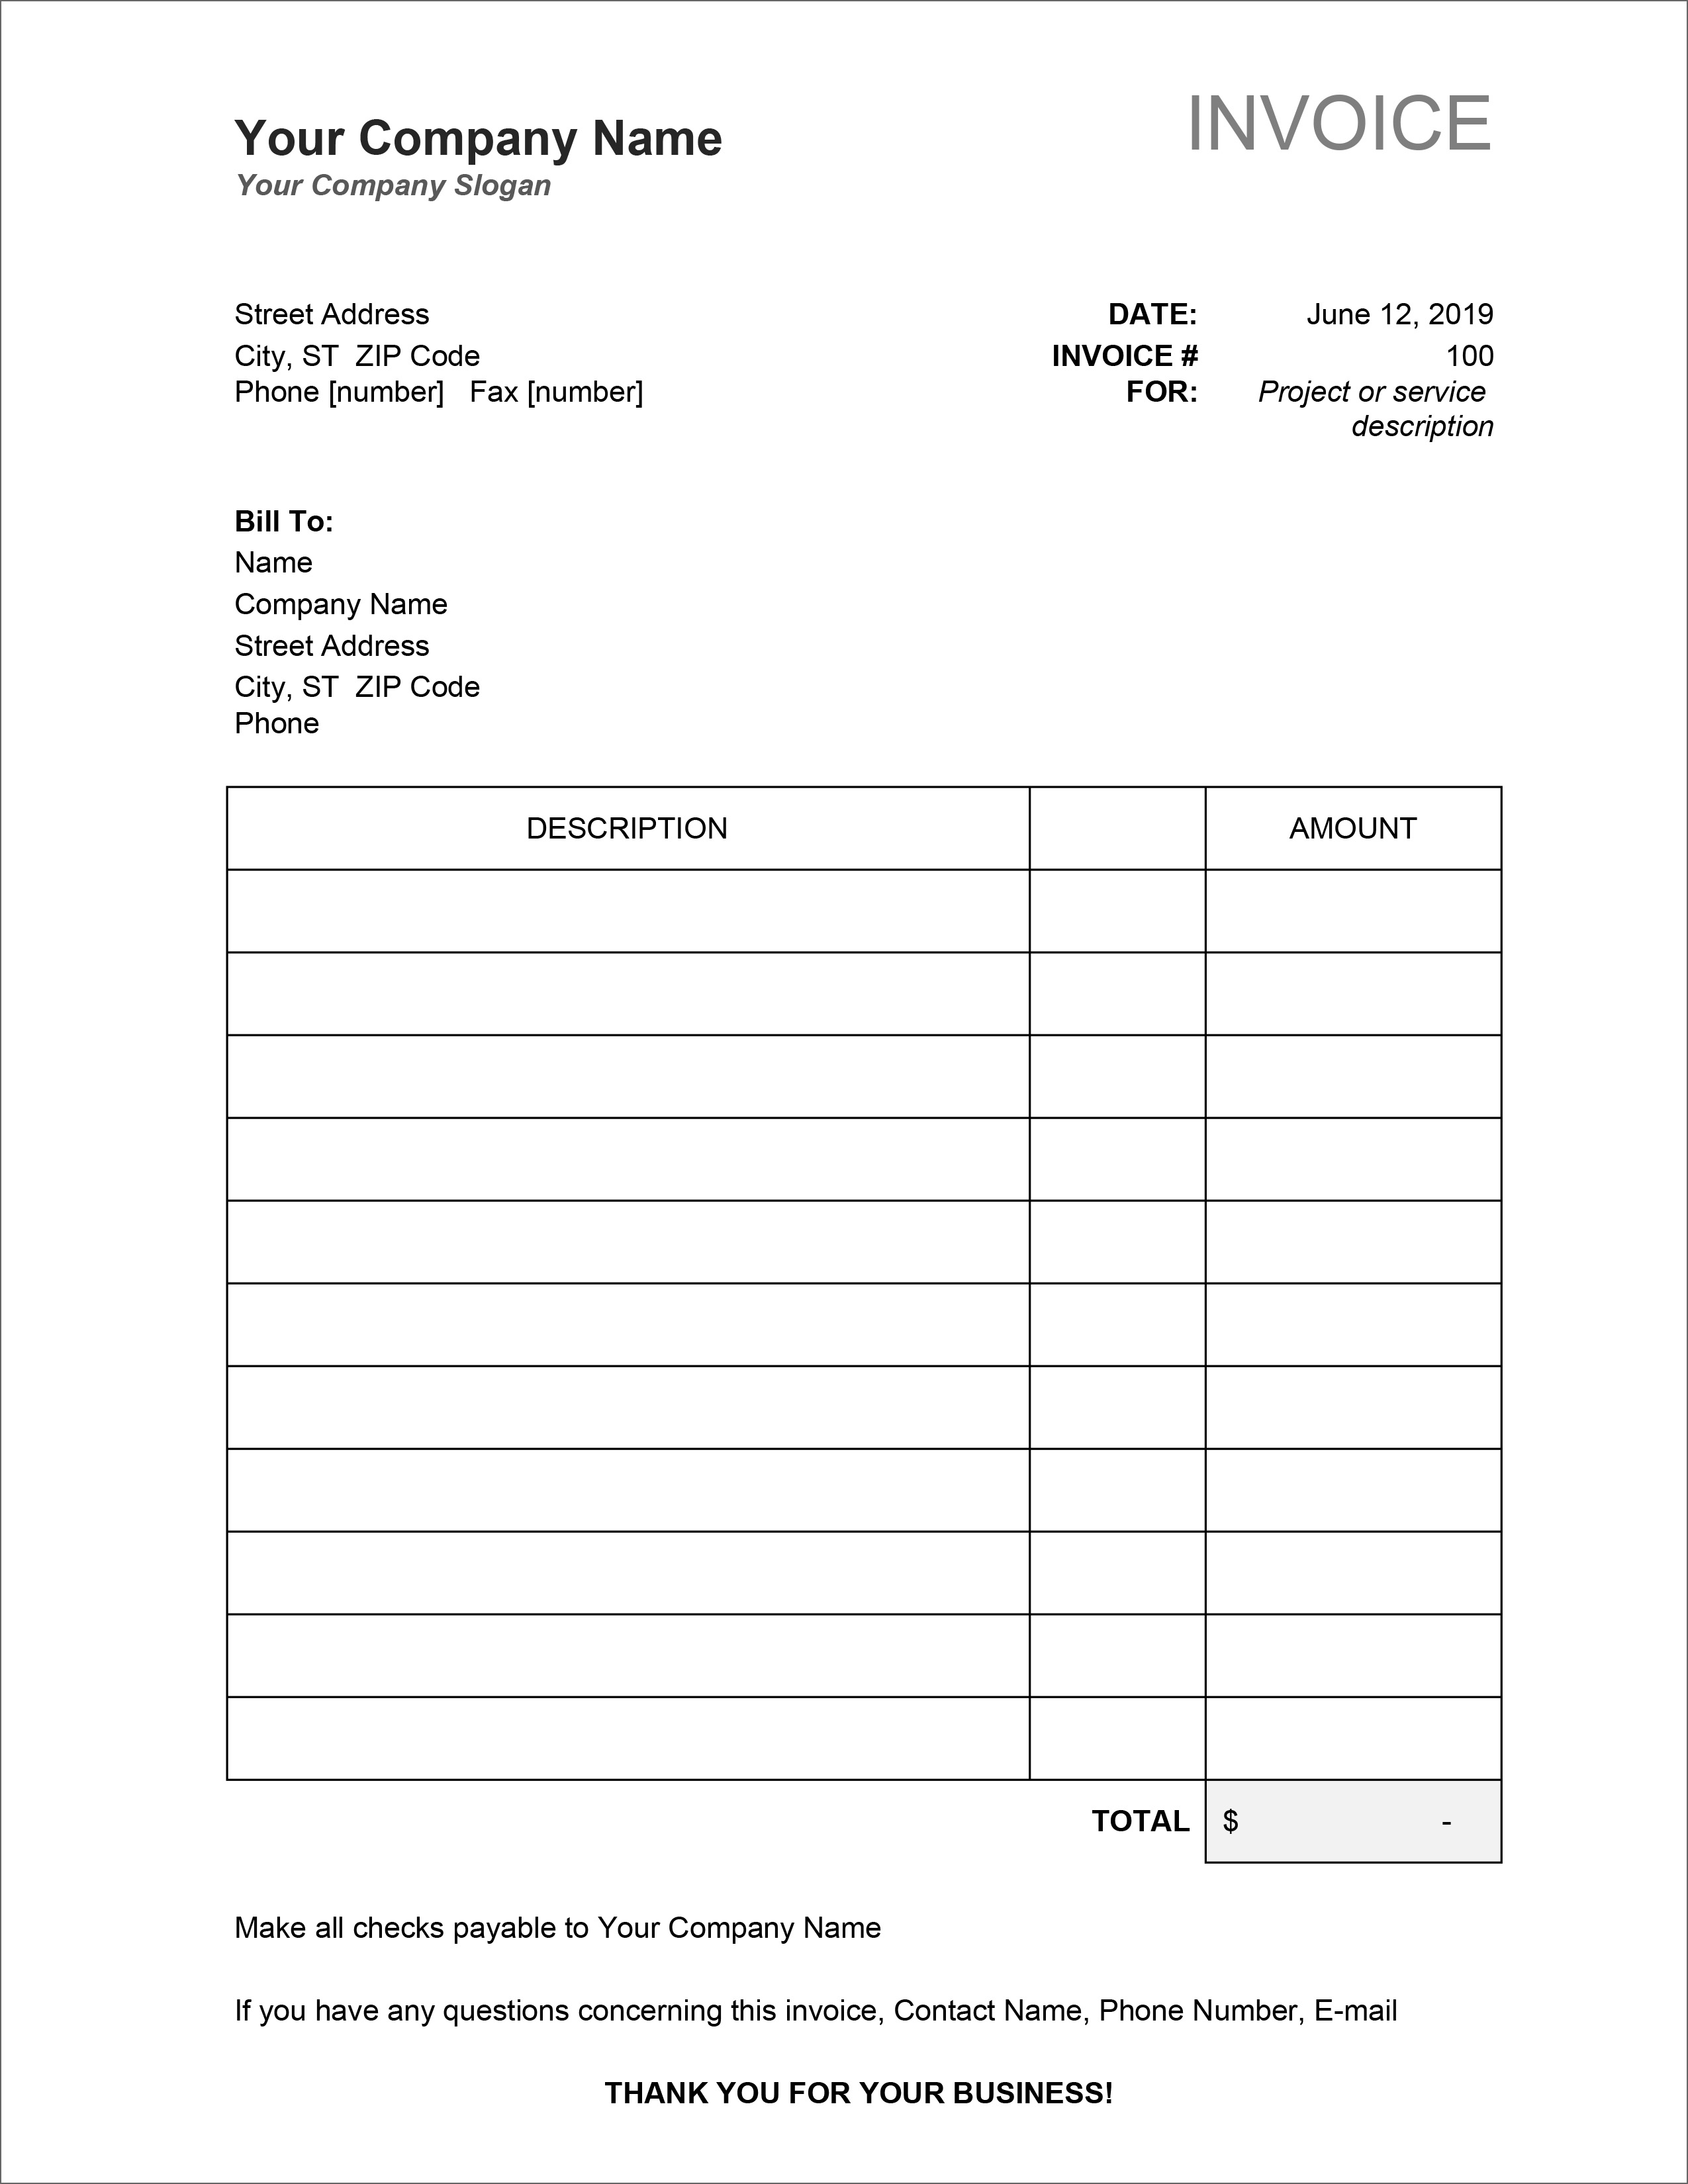 Detail English Invoice Template Nomer 48